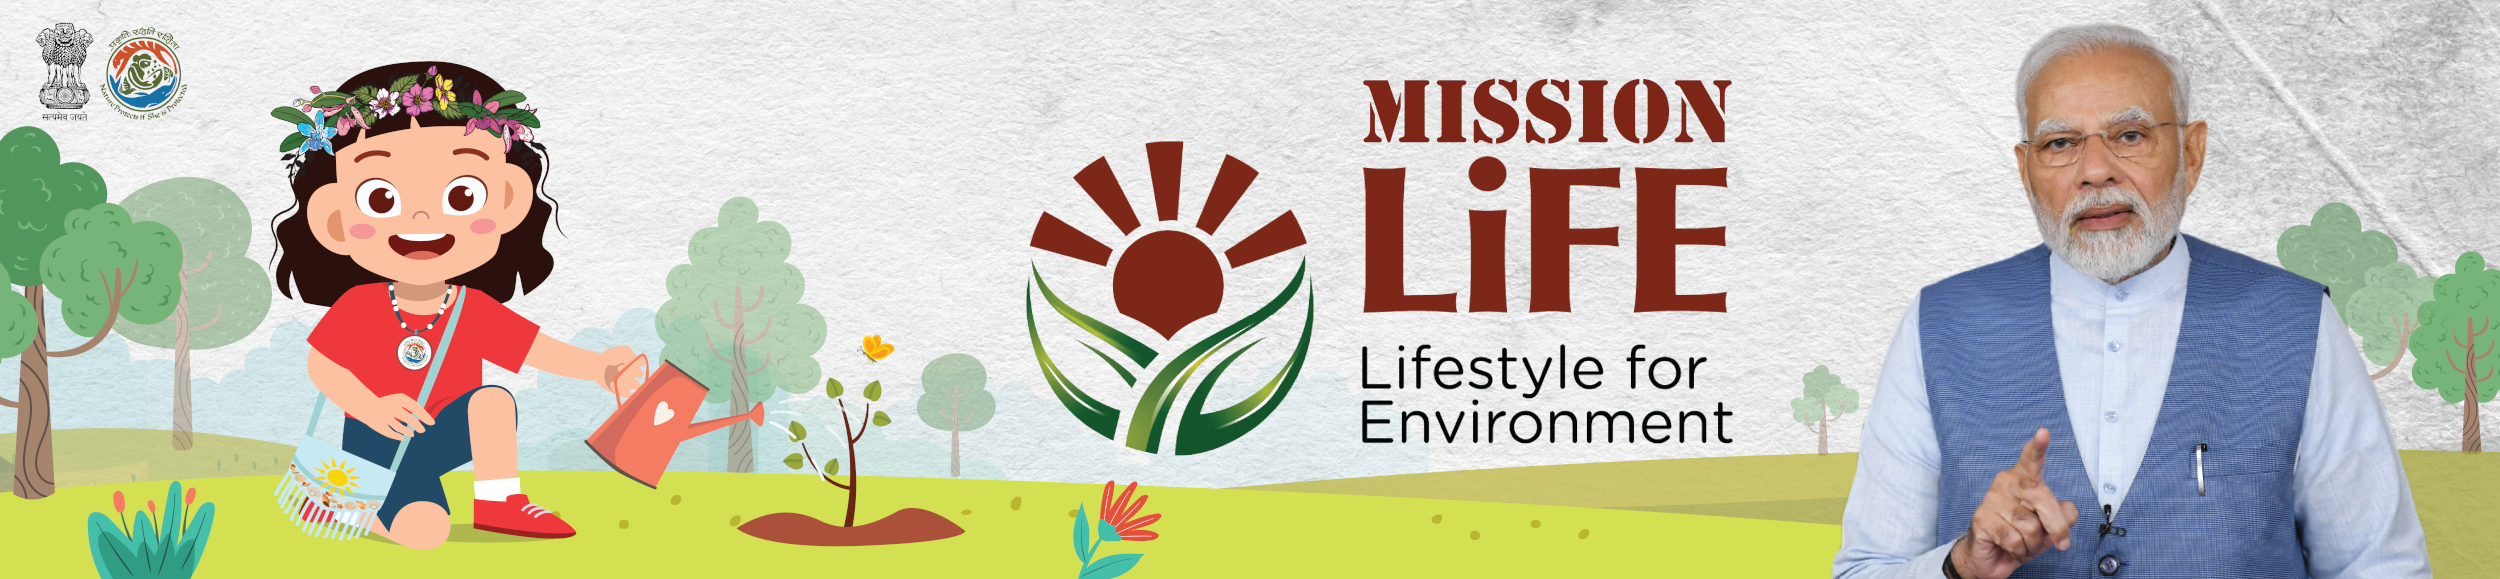 Mission Lifestyle for Environment